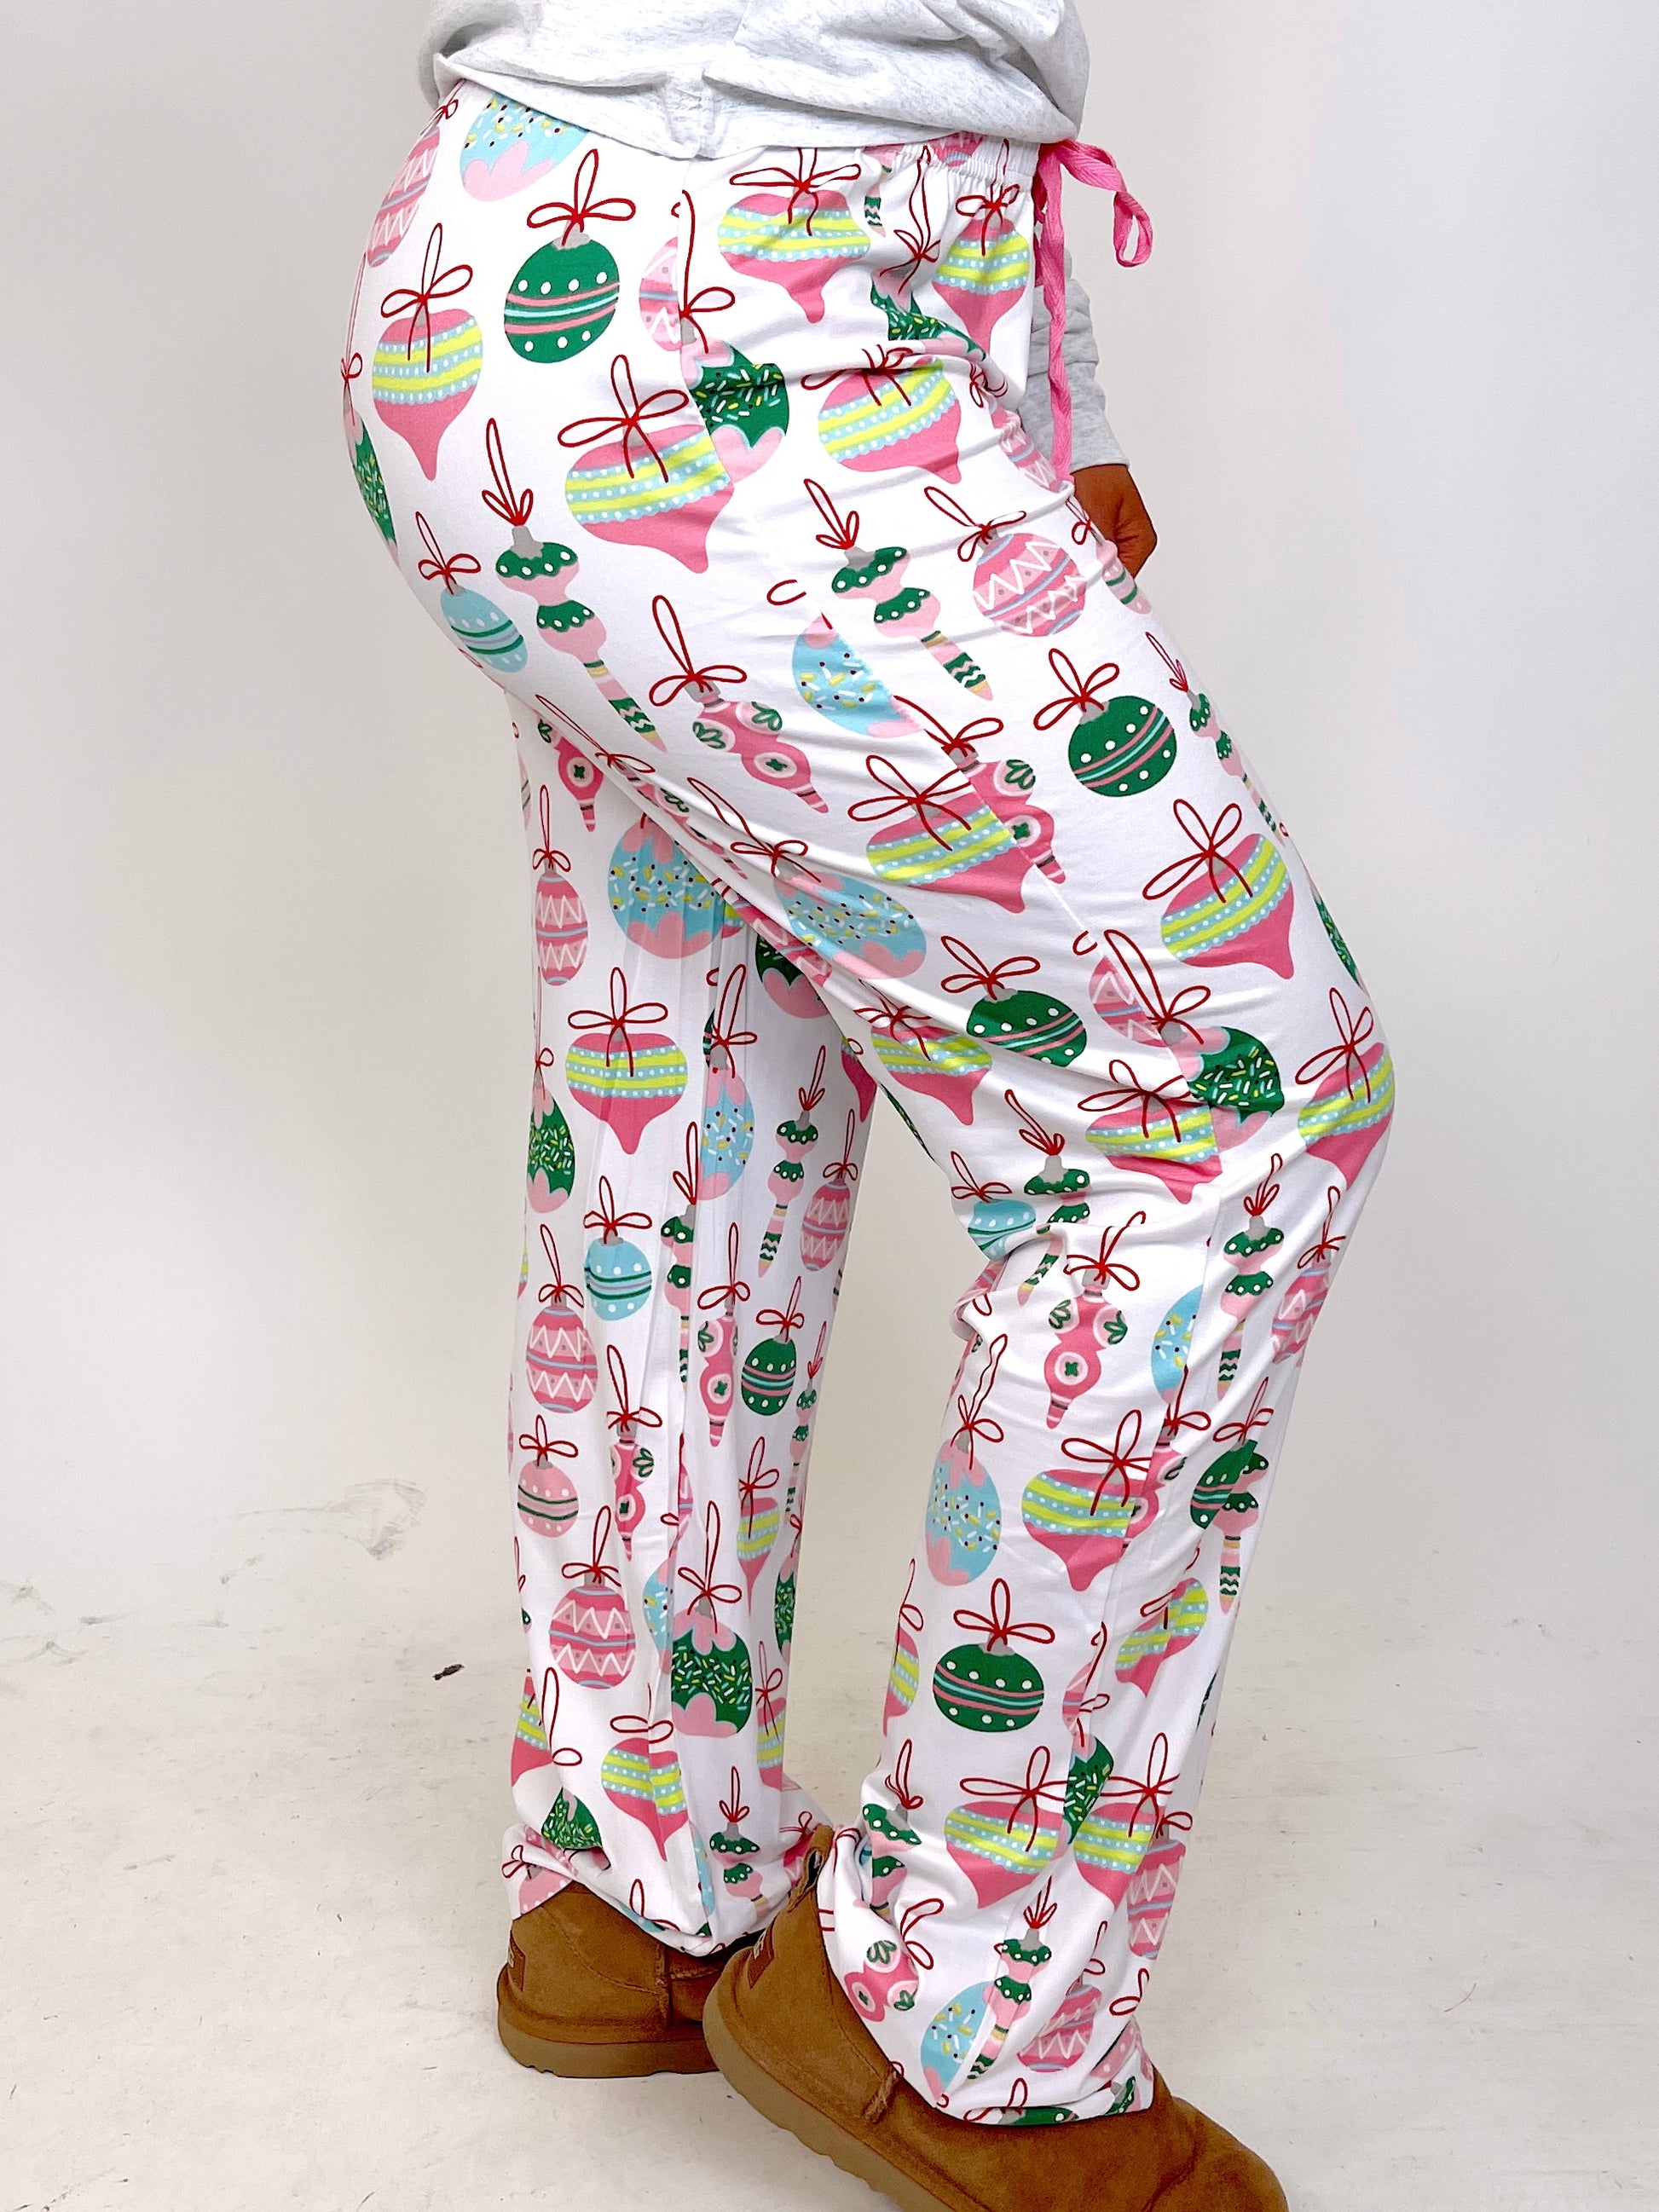 Christmas All Around Sleep Pants | DOORBUSTER-Lounge Pants-The Royal Standard-The Village Shoppe, Women’s Fashion Boutique, Shop Online and In Store - Located in Muscle Shoals, AL.